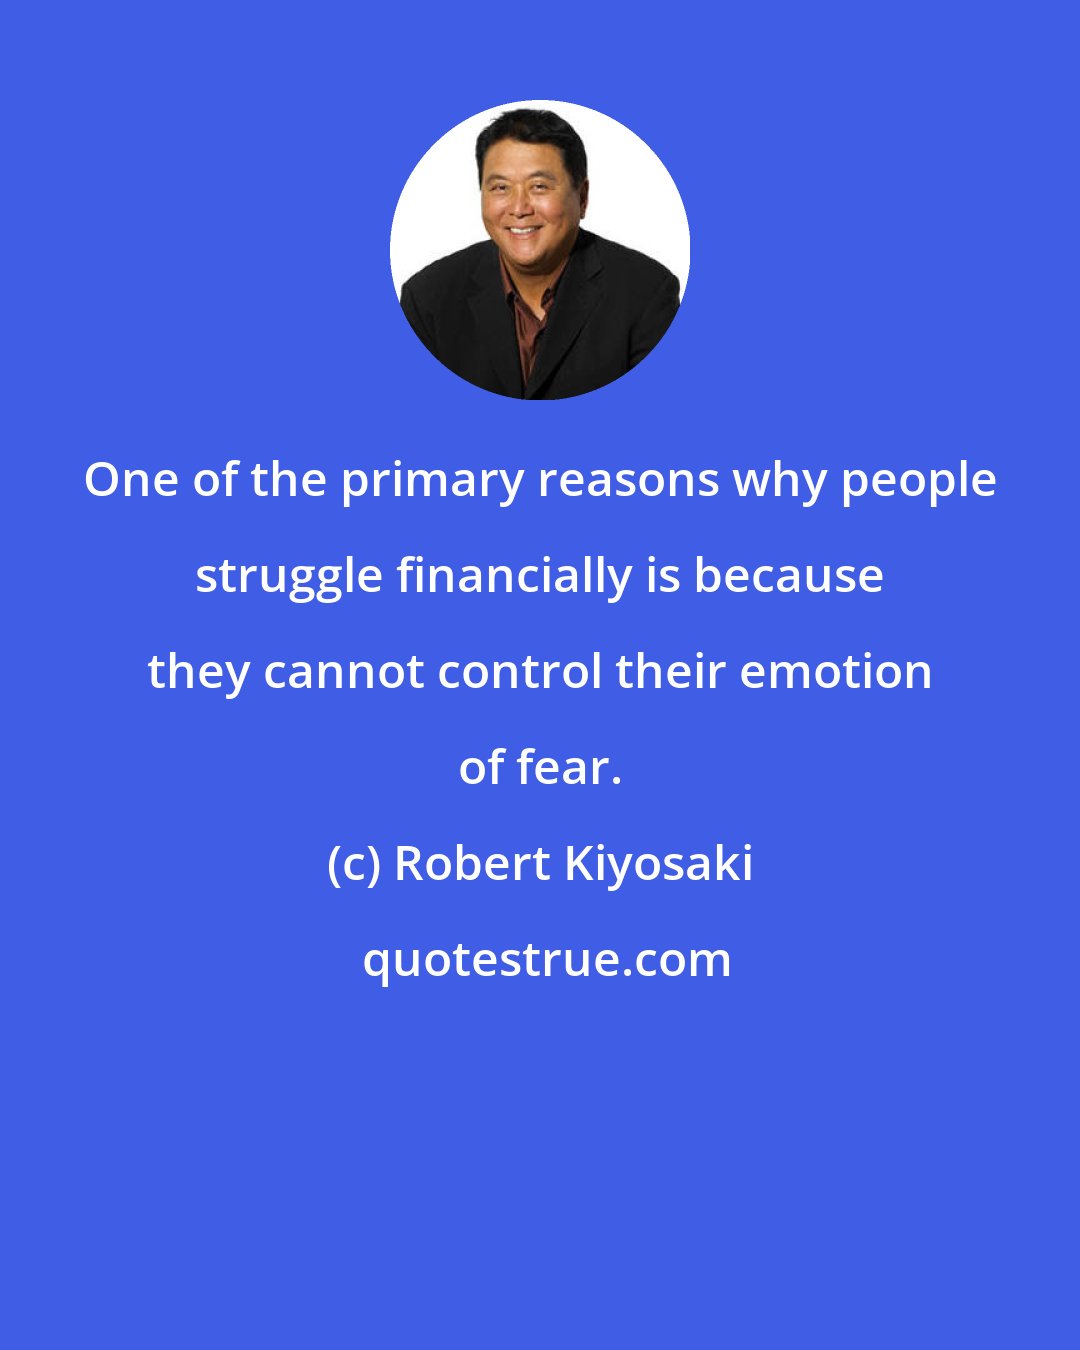 Robert Kiyosaki: One of the primary reasons why people struggle financially is because they cannot control their emotion of fear.